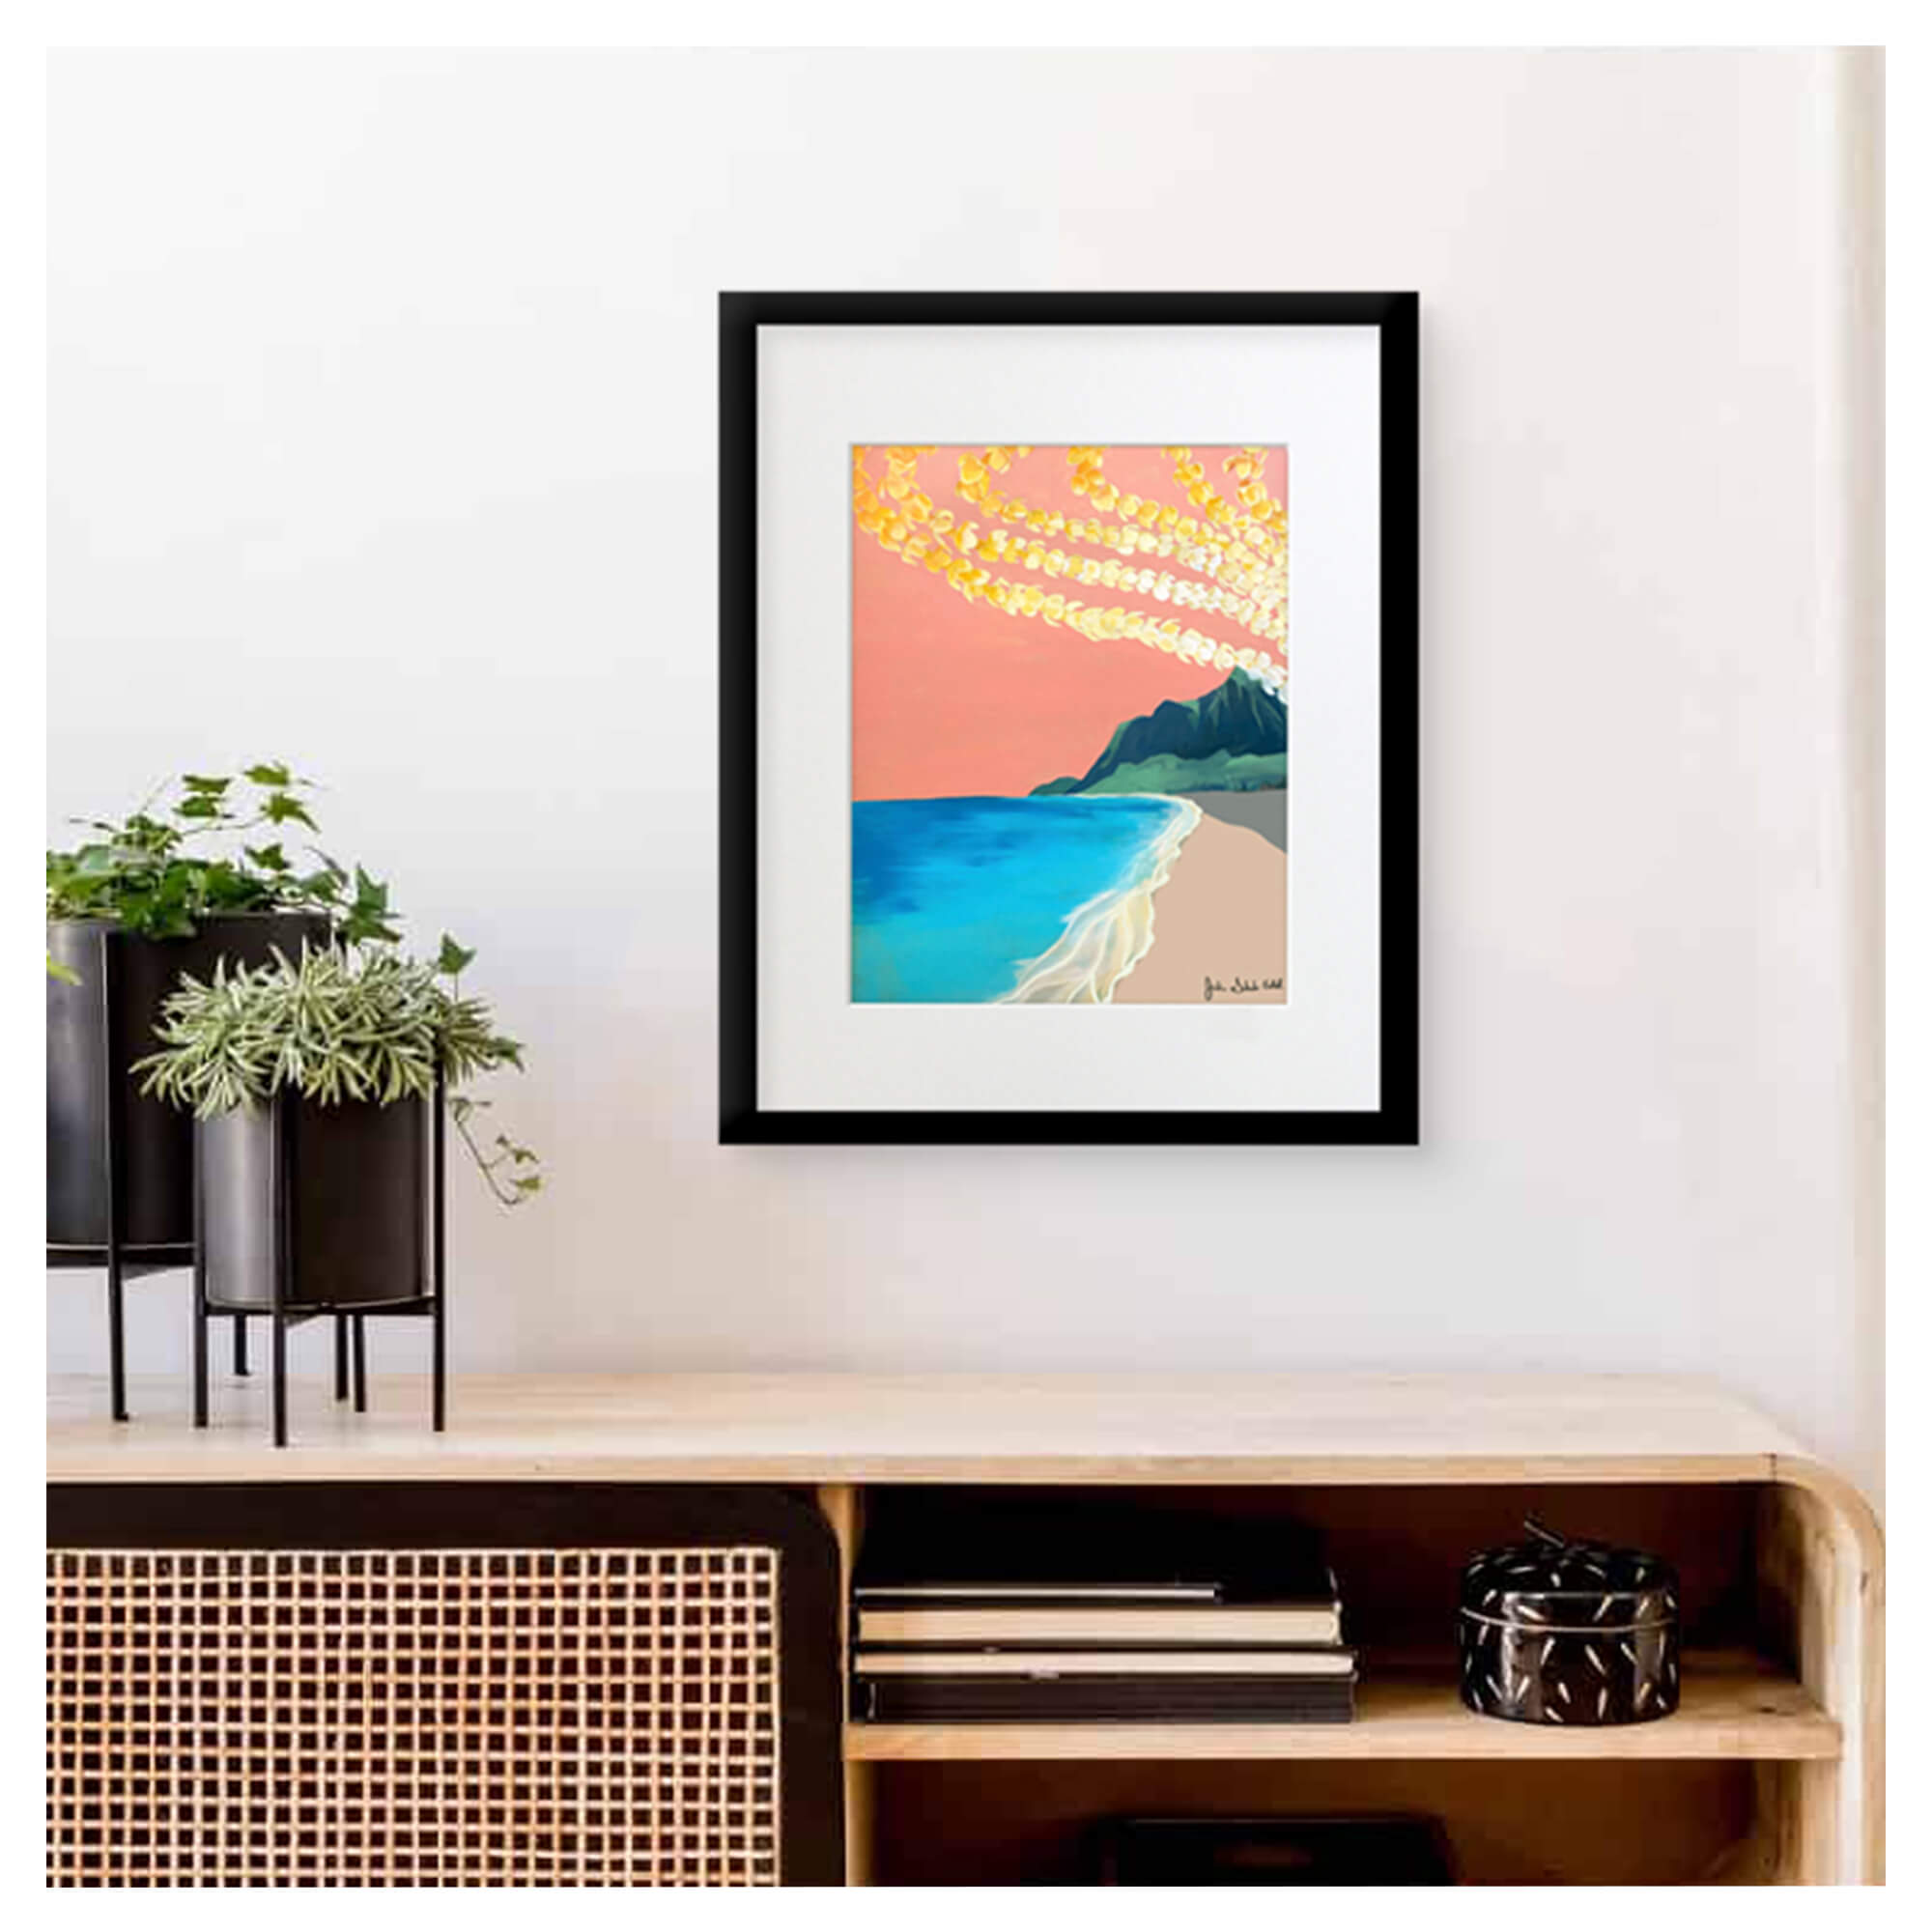 A framed matted art print featuring a beautiful landscape of Hawaii with lei above by Hawaii artist Jackie Eitel